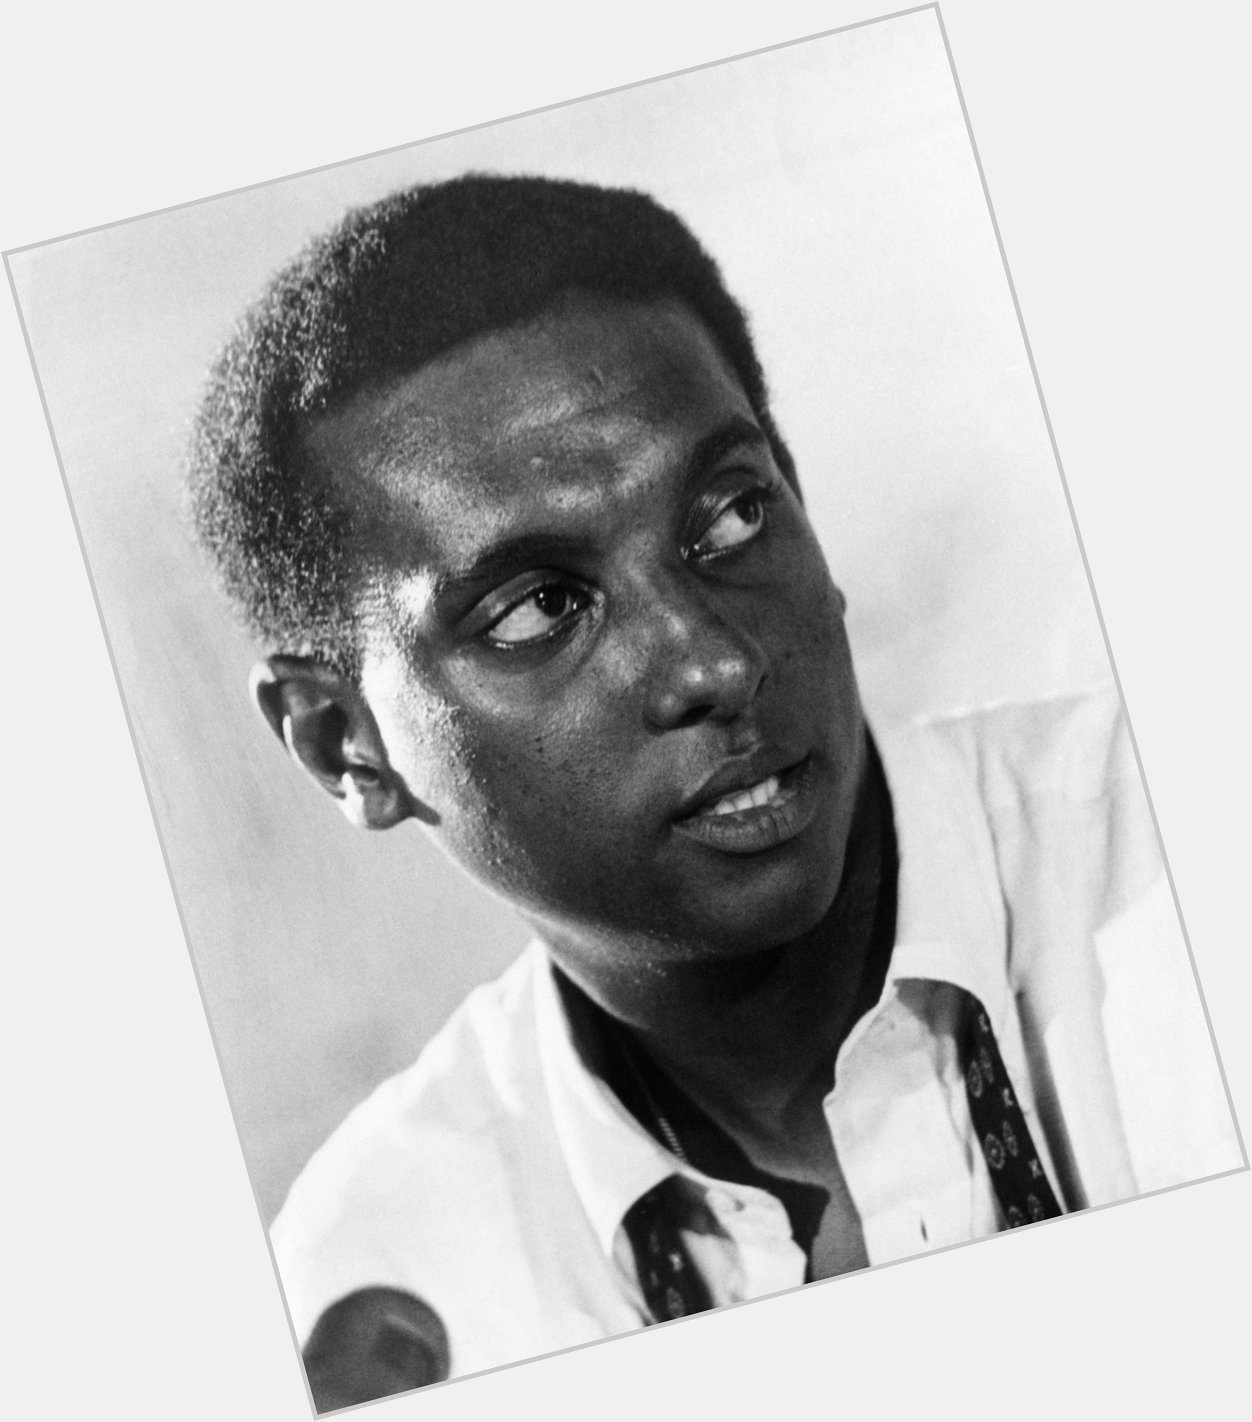 Happy birthday to one of my favorite revolutionaries, Stokely Carmichael (Kwame Ture). 